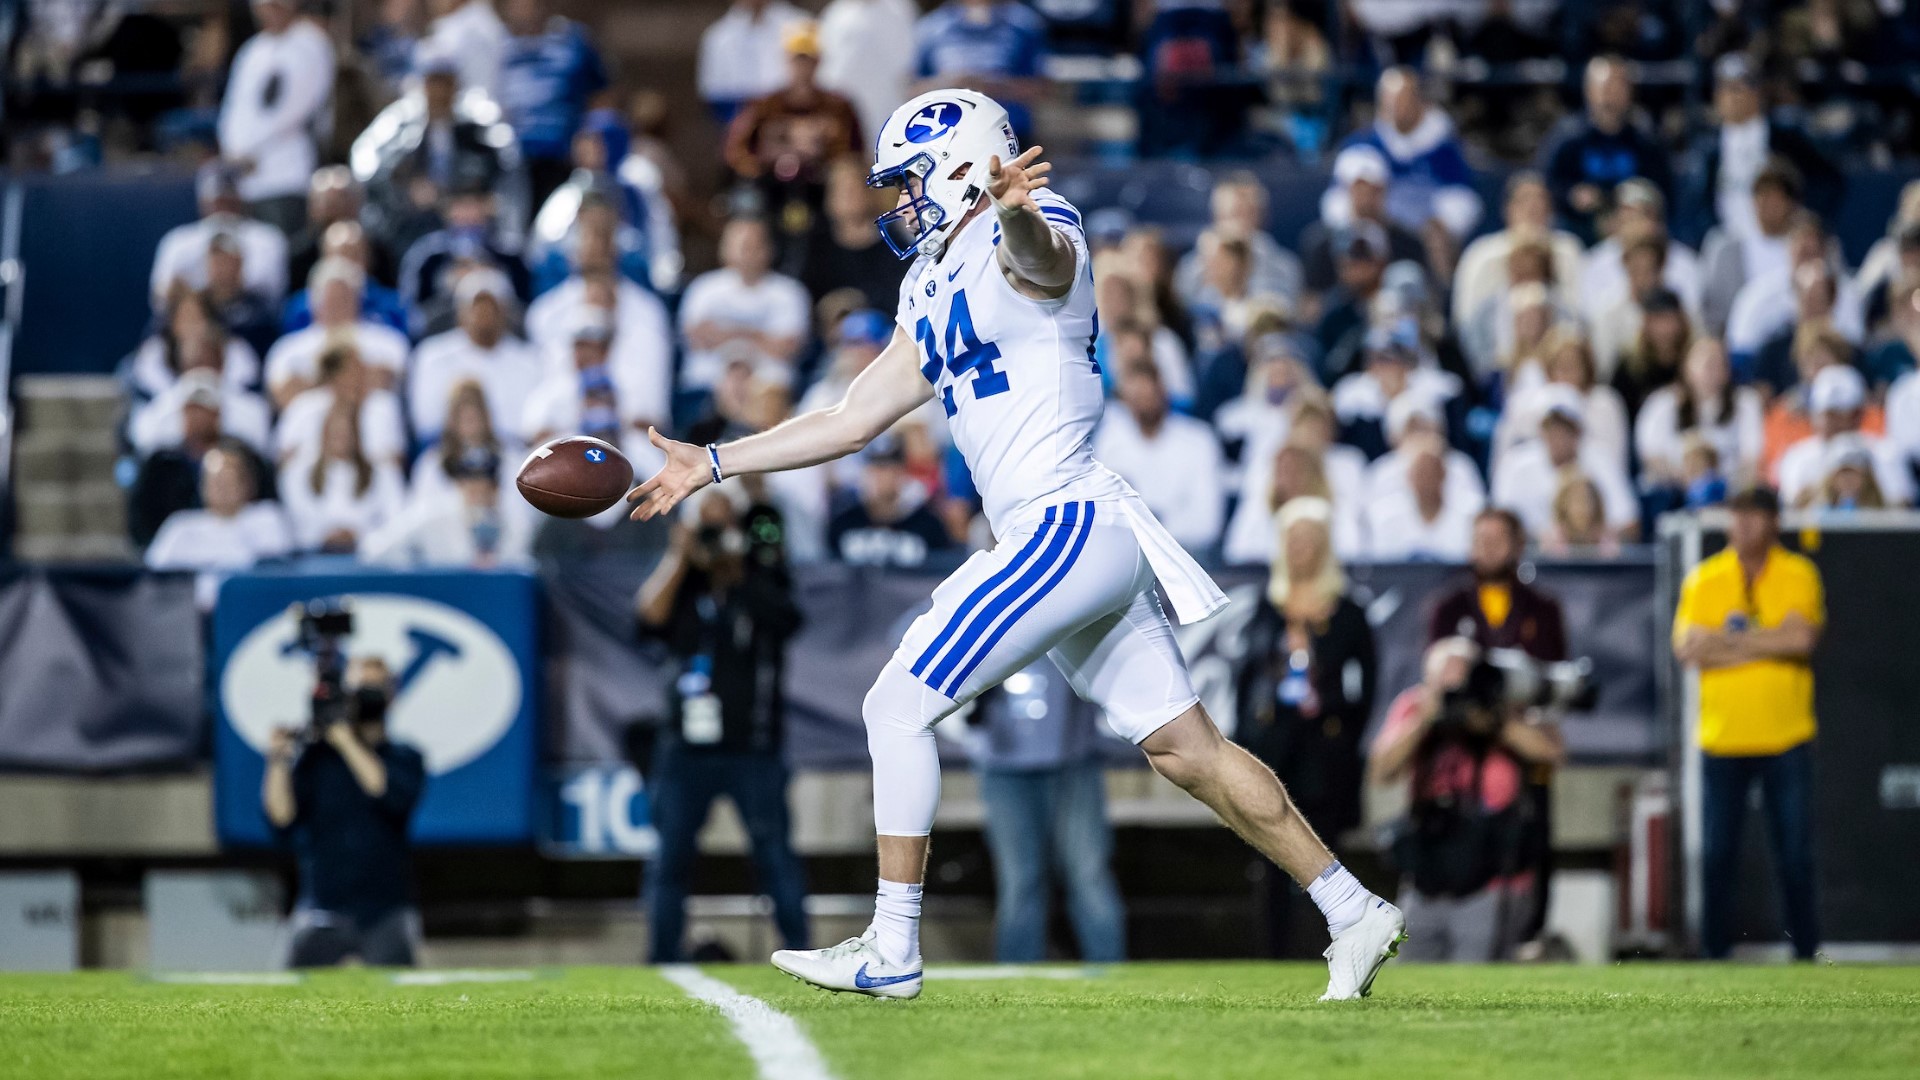 Rehkow is having a phenomenal season thus far as he broke a BYU punting record and ranks 4th in the nation in punting yardage.